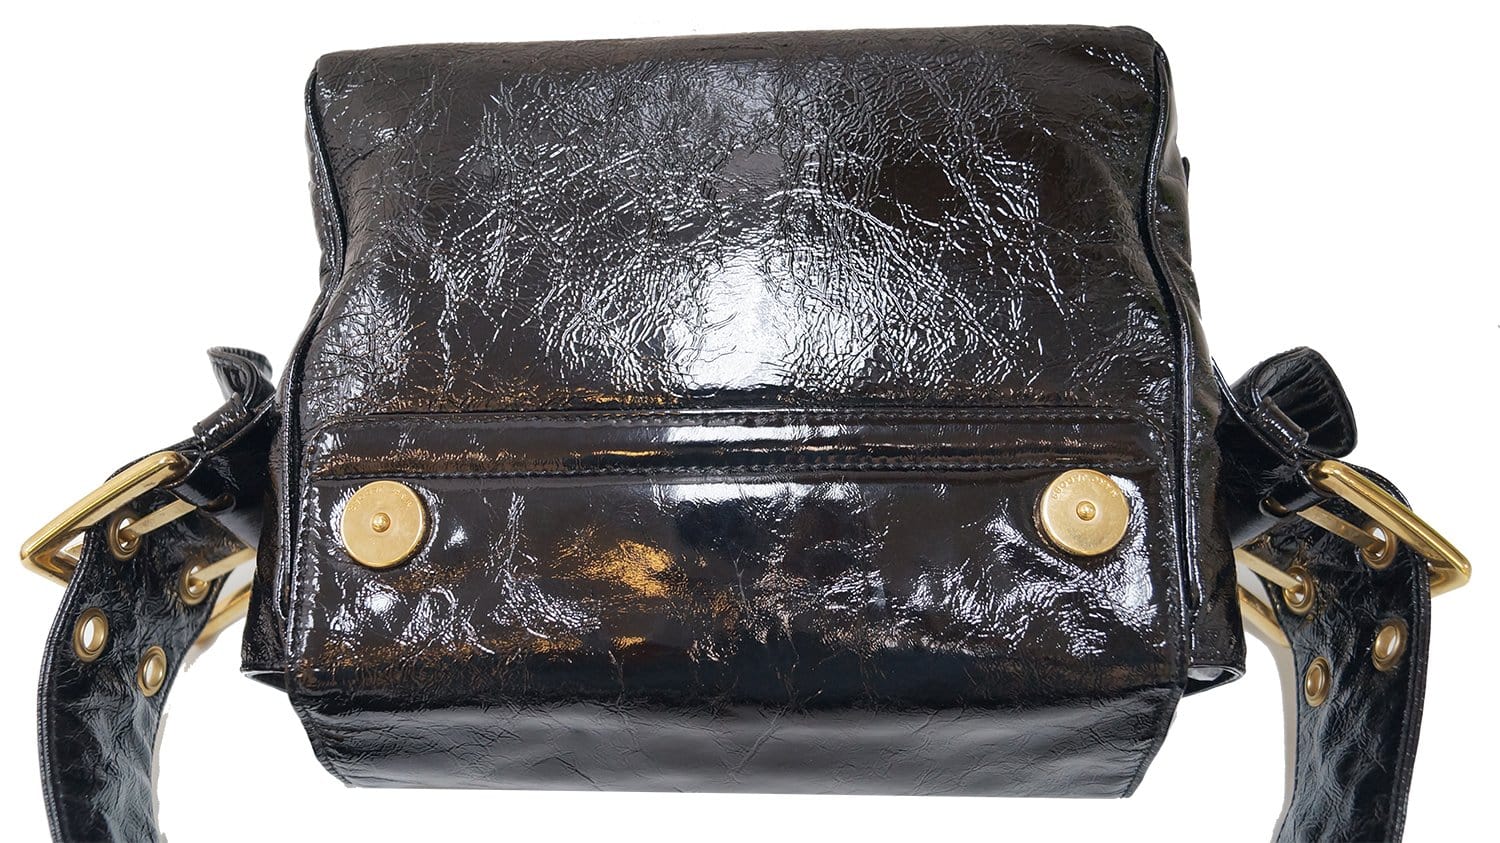 Marc Jacobs Patent Leather Clutch Bag